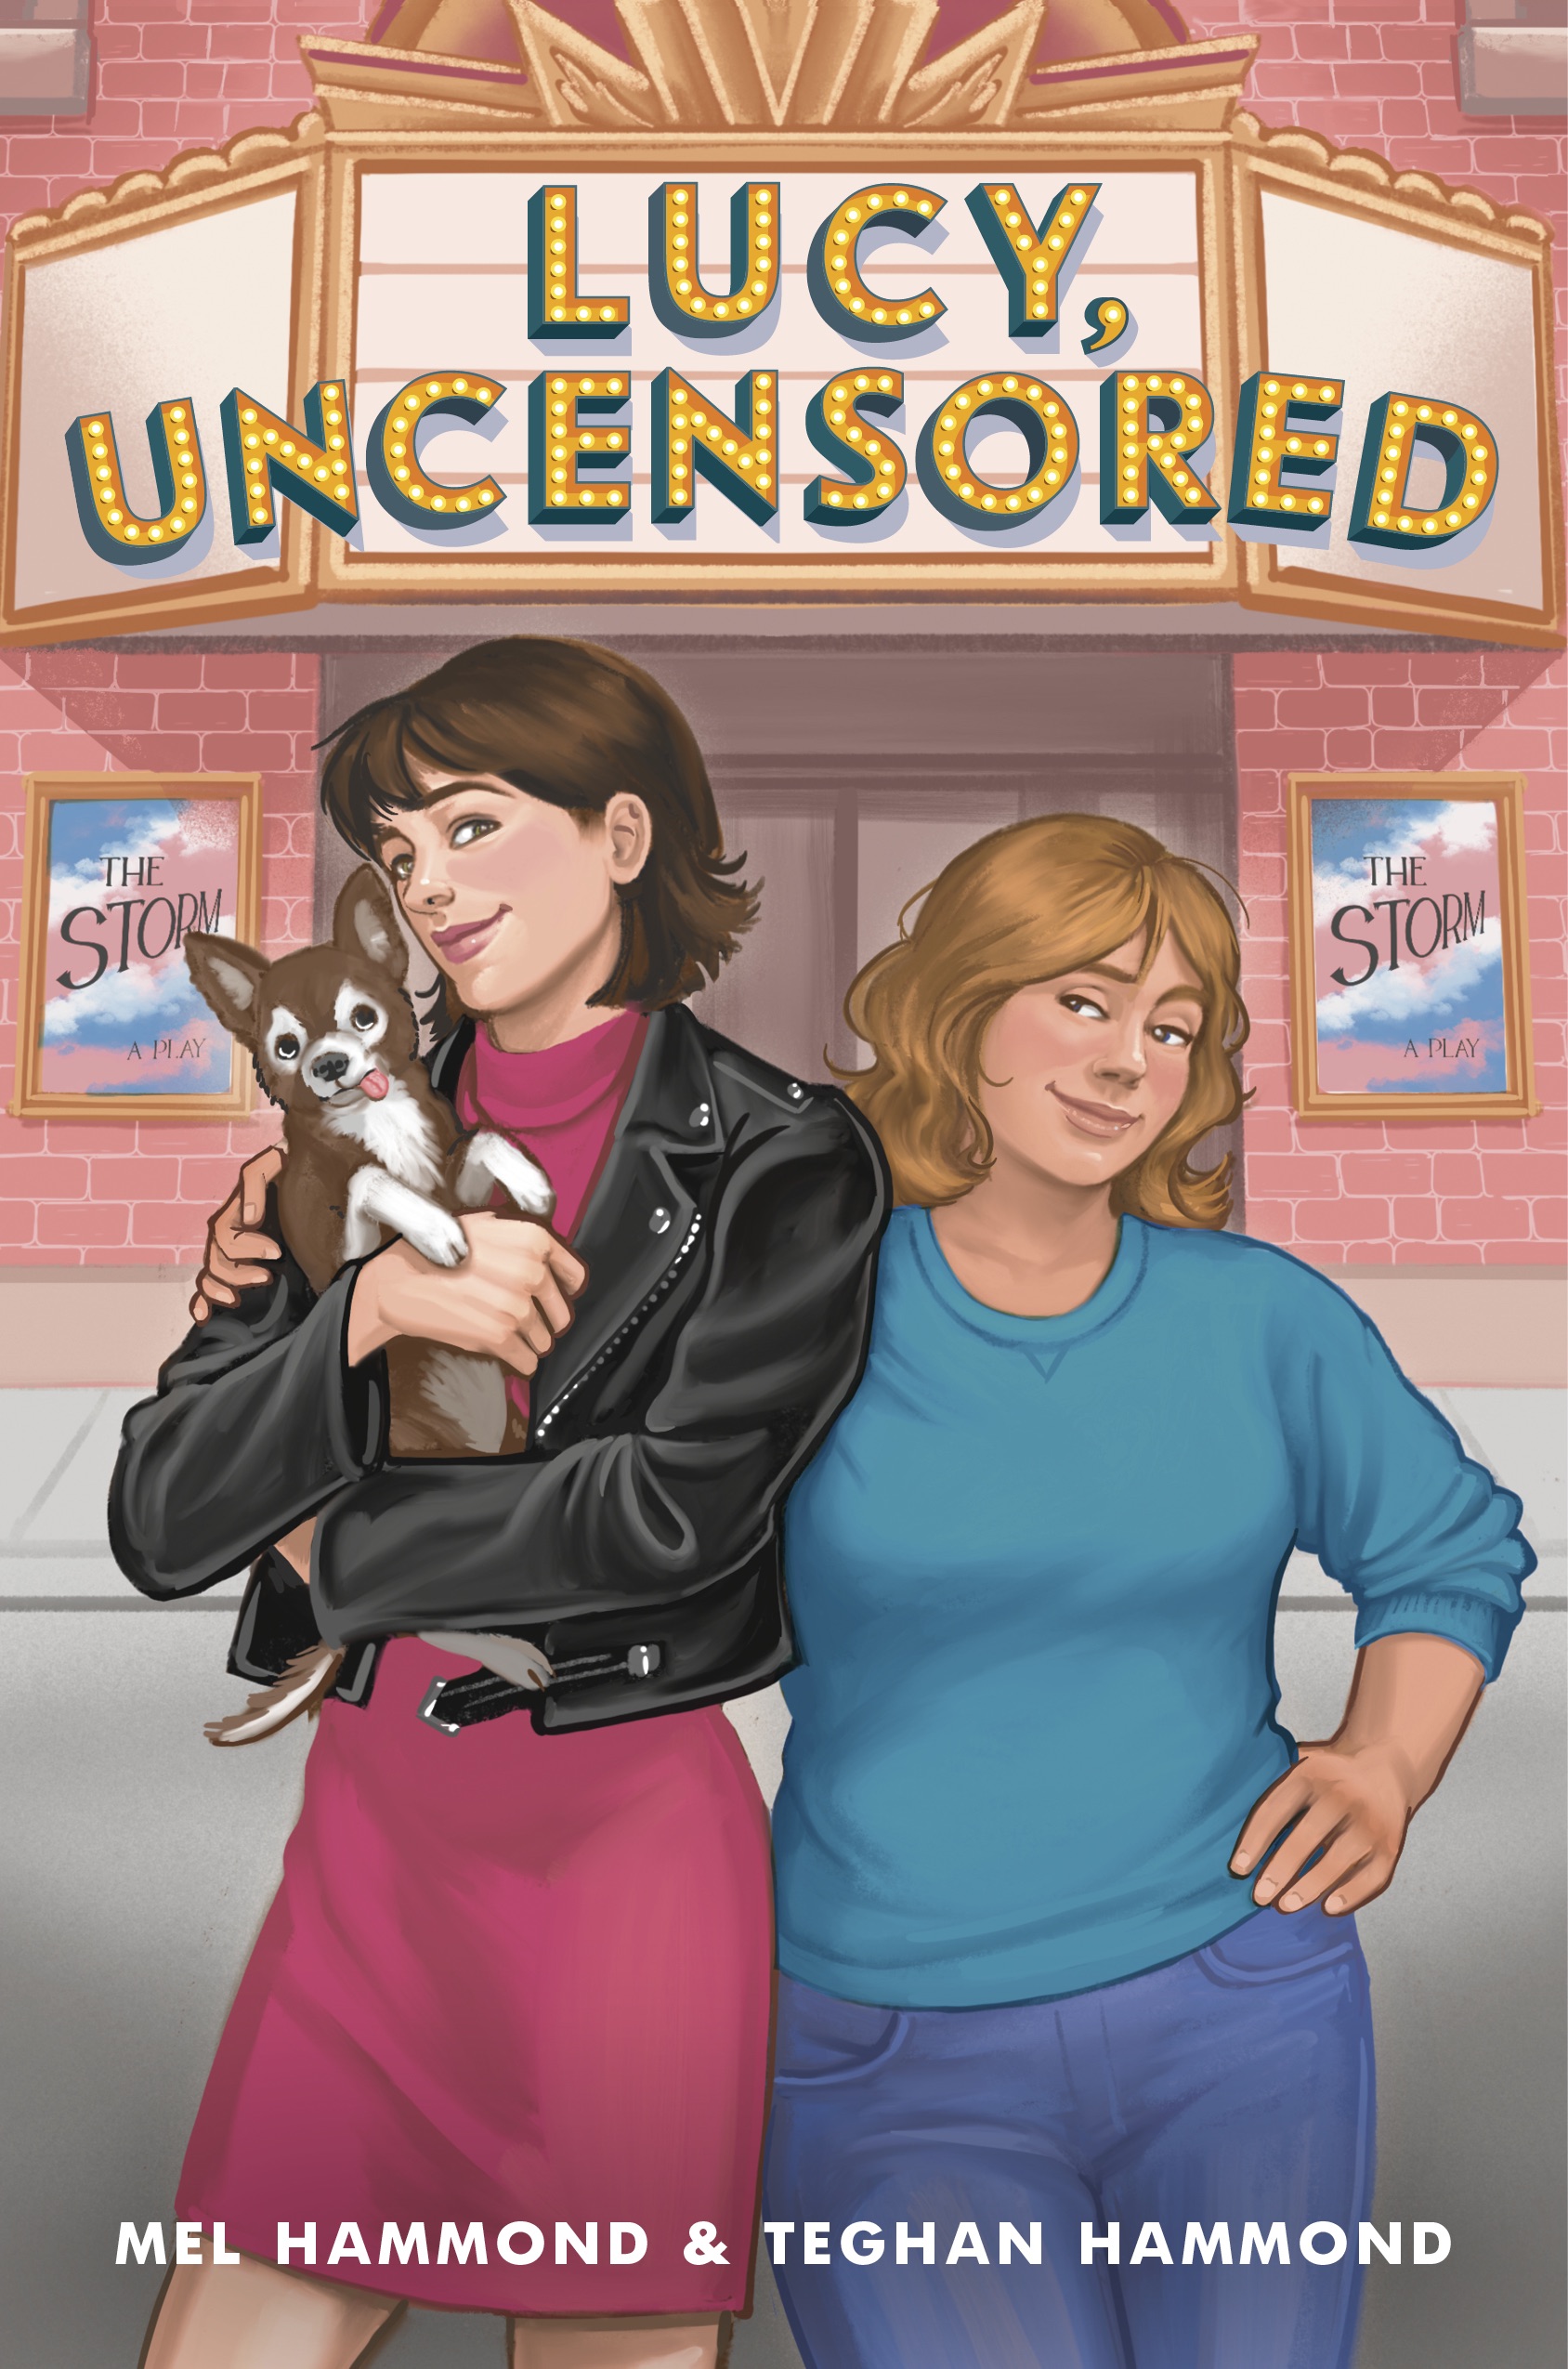 Cover for Lucy, Uncensored, featuring two teenage girls in front of a theater marquee